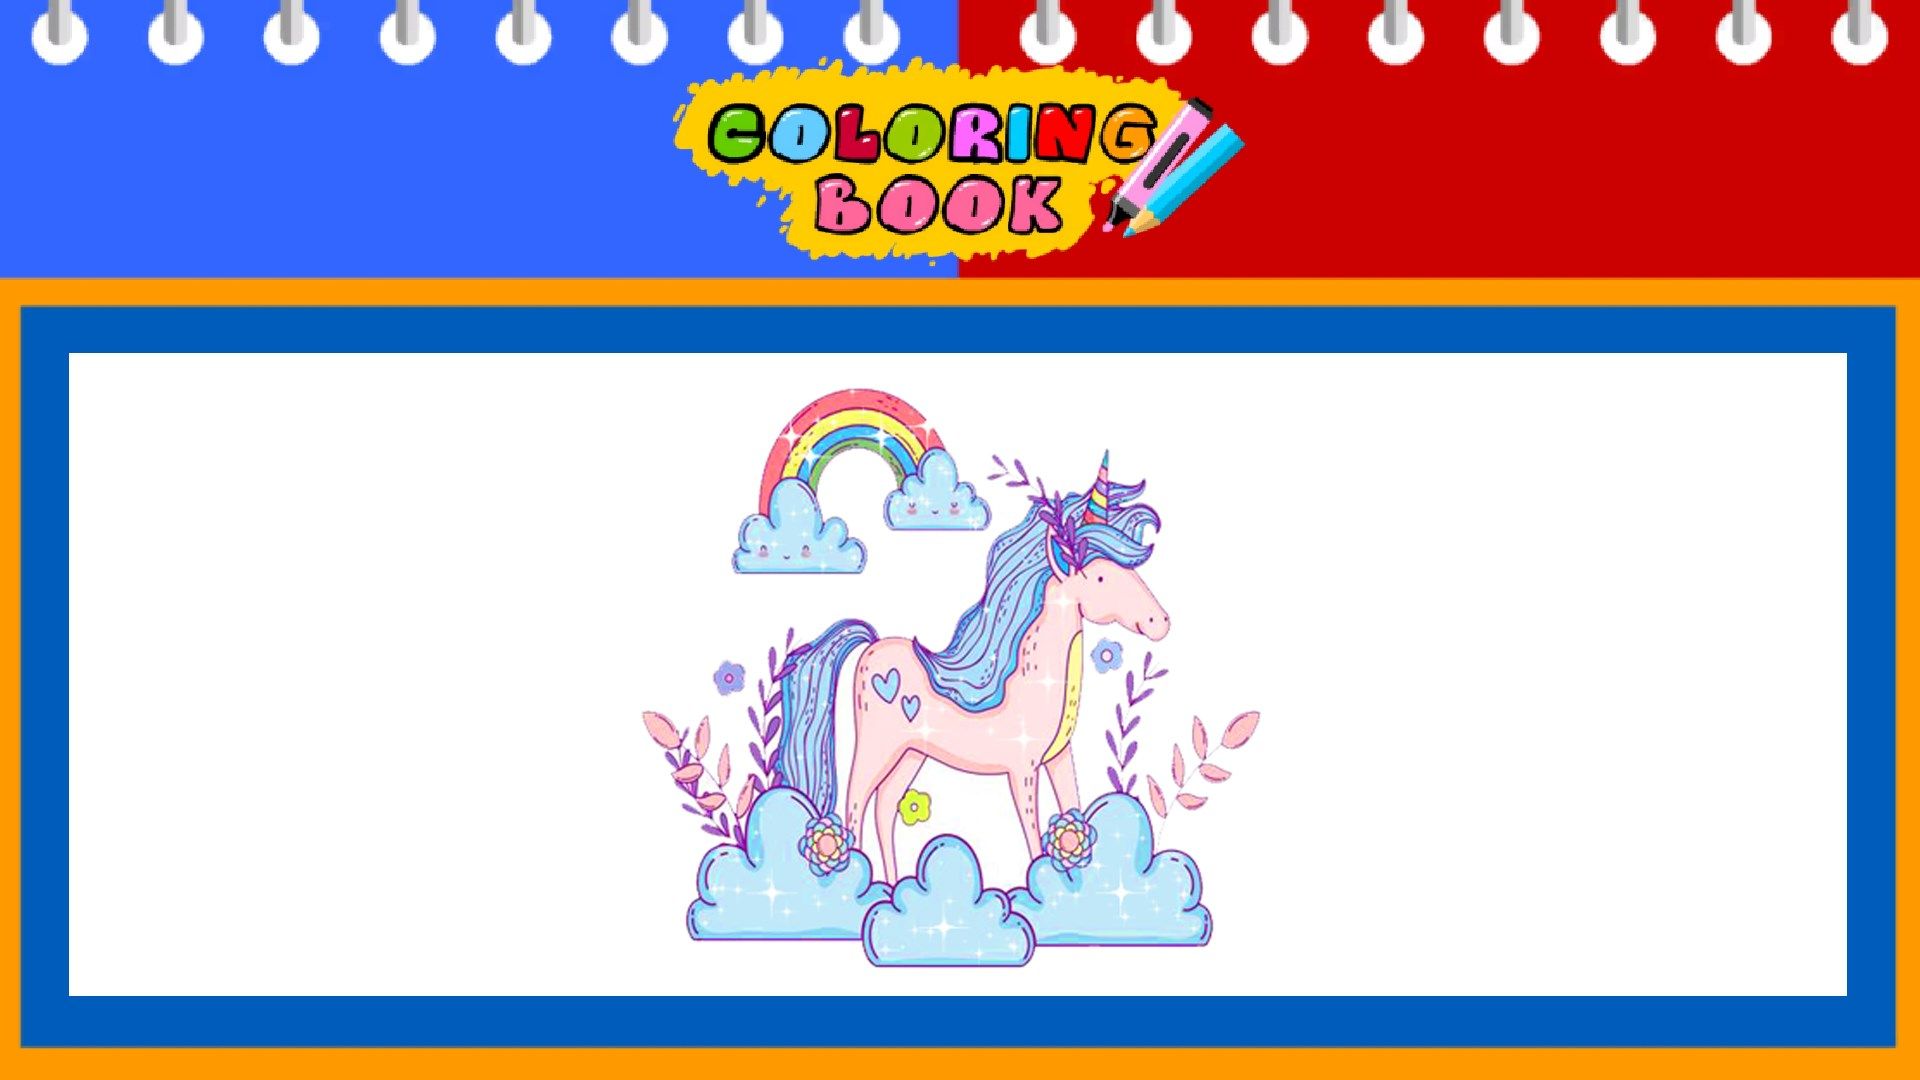 Unicorn Coloring Book Pages